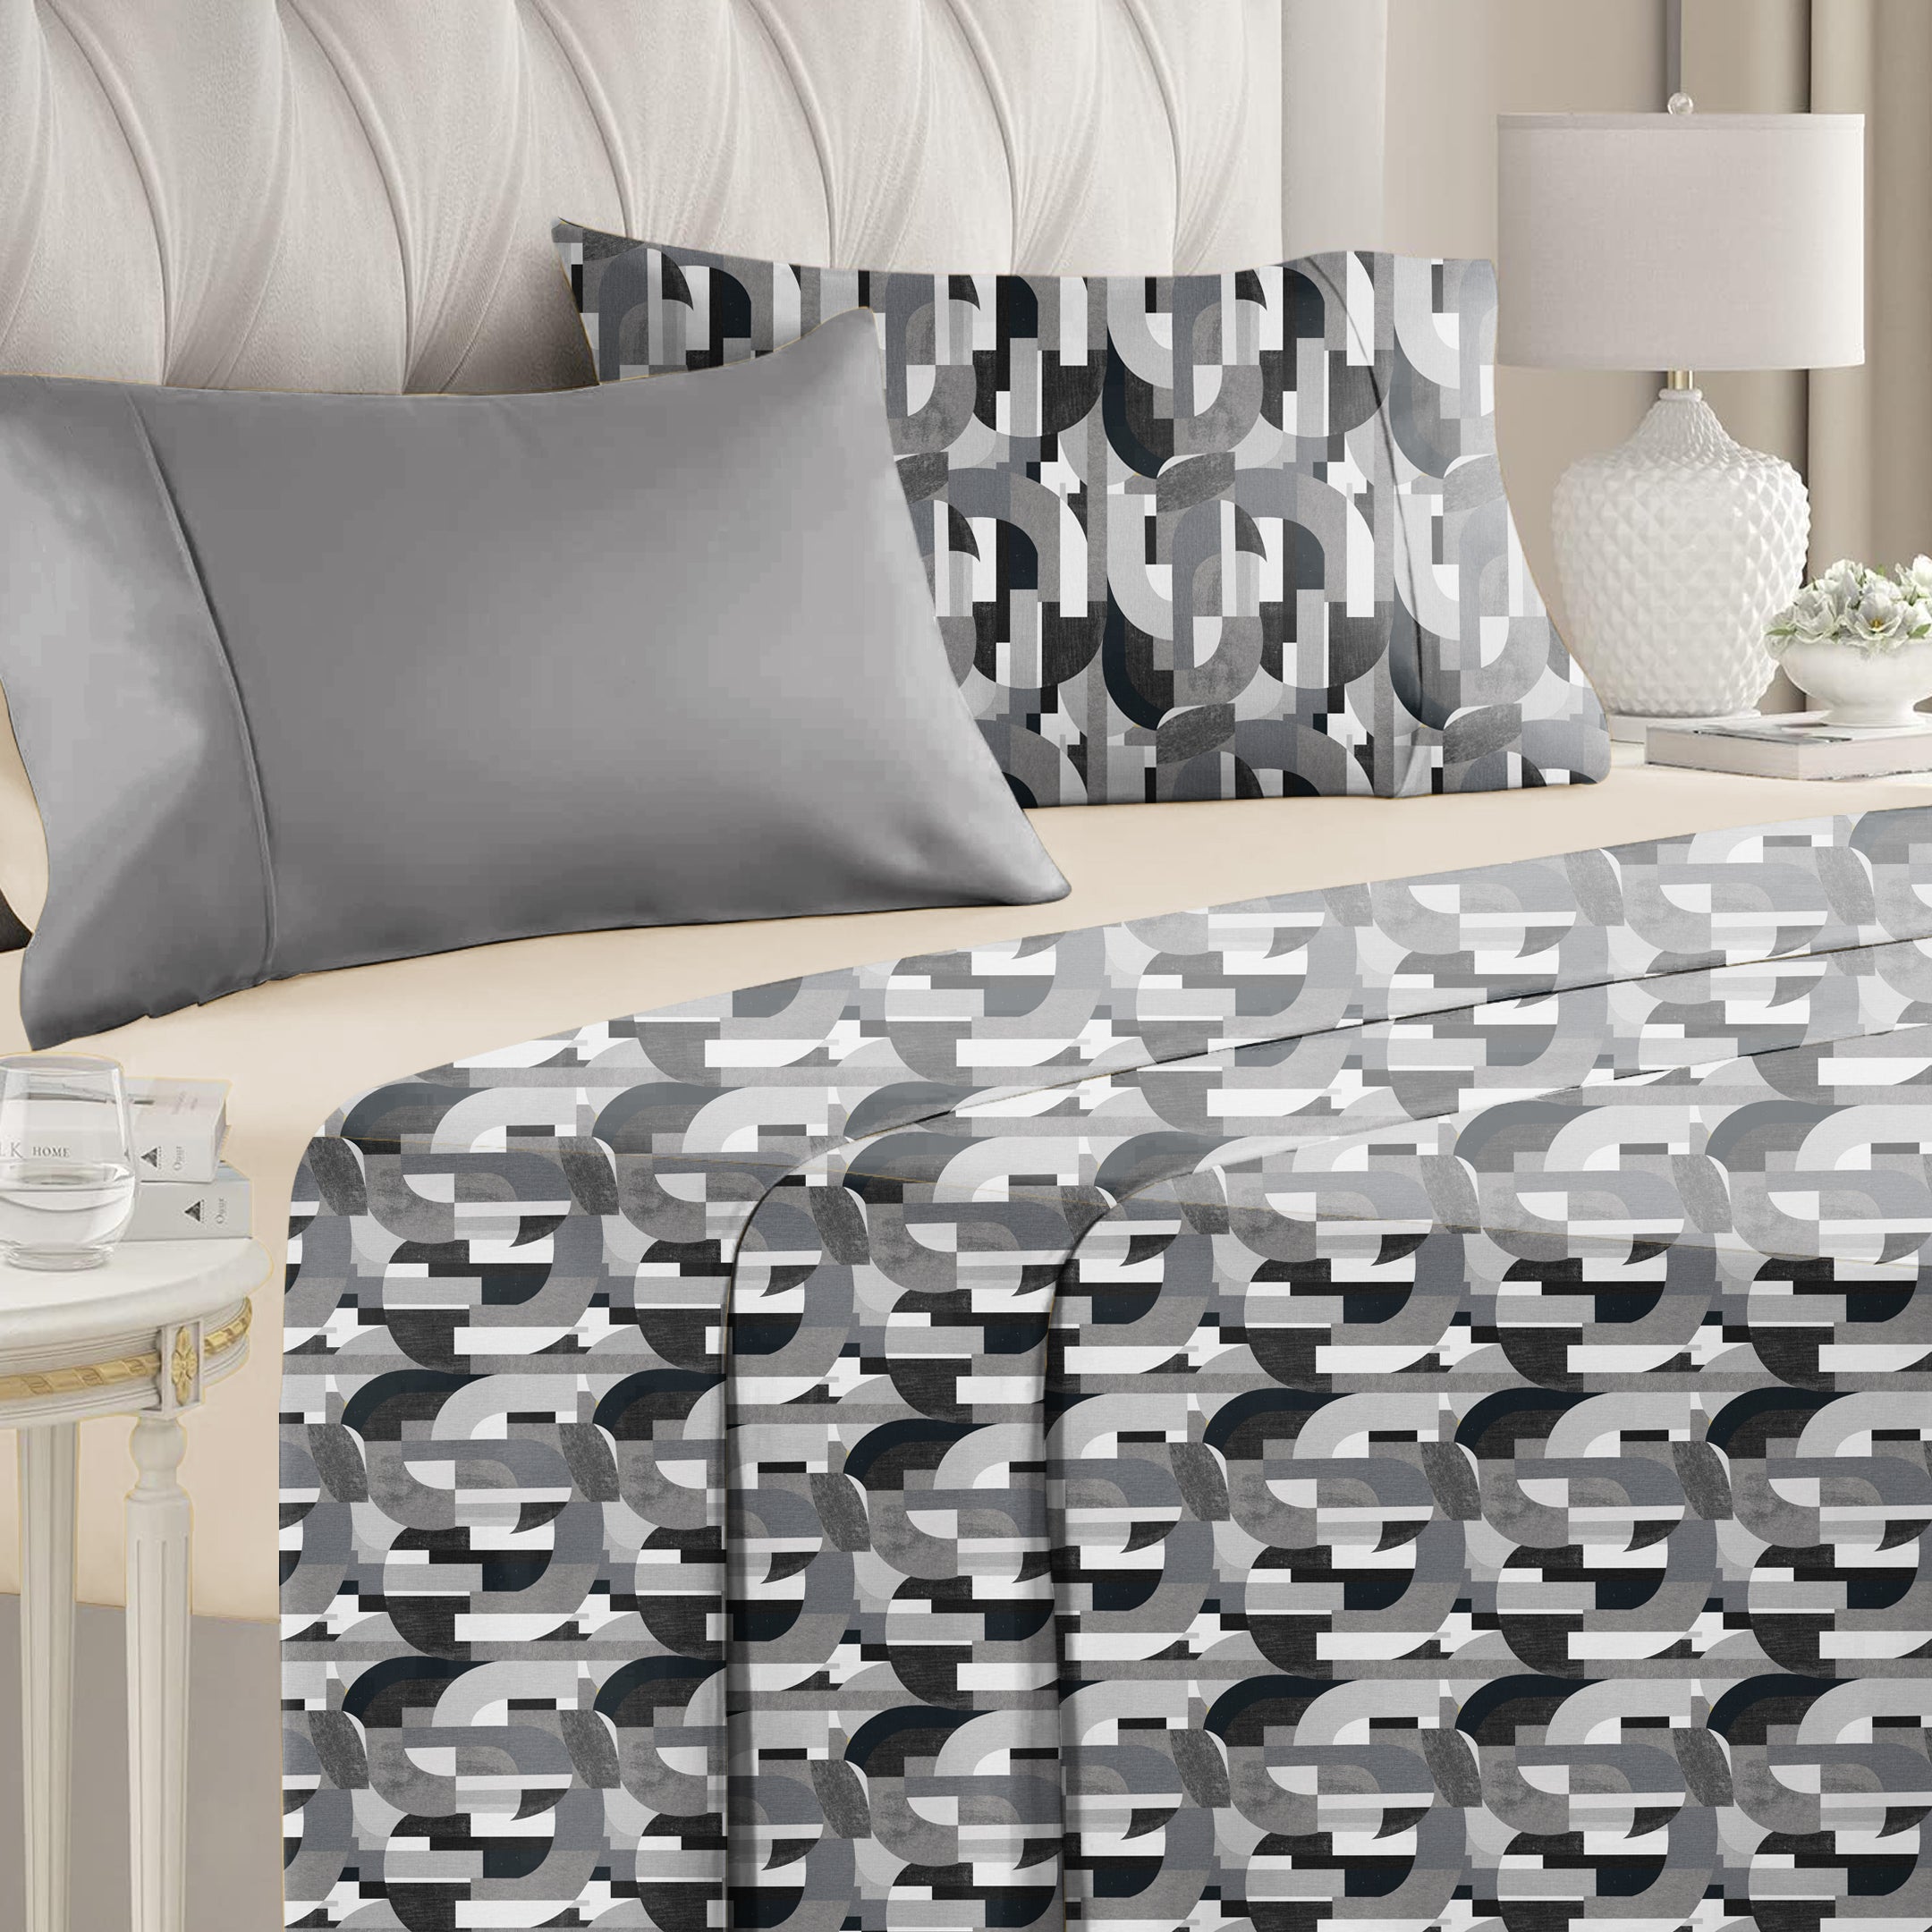 illusion Curves Bedsheet for Double Bed with 2 PillowCovers King Size (104" X 90") Black/Gray